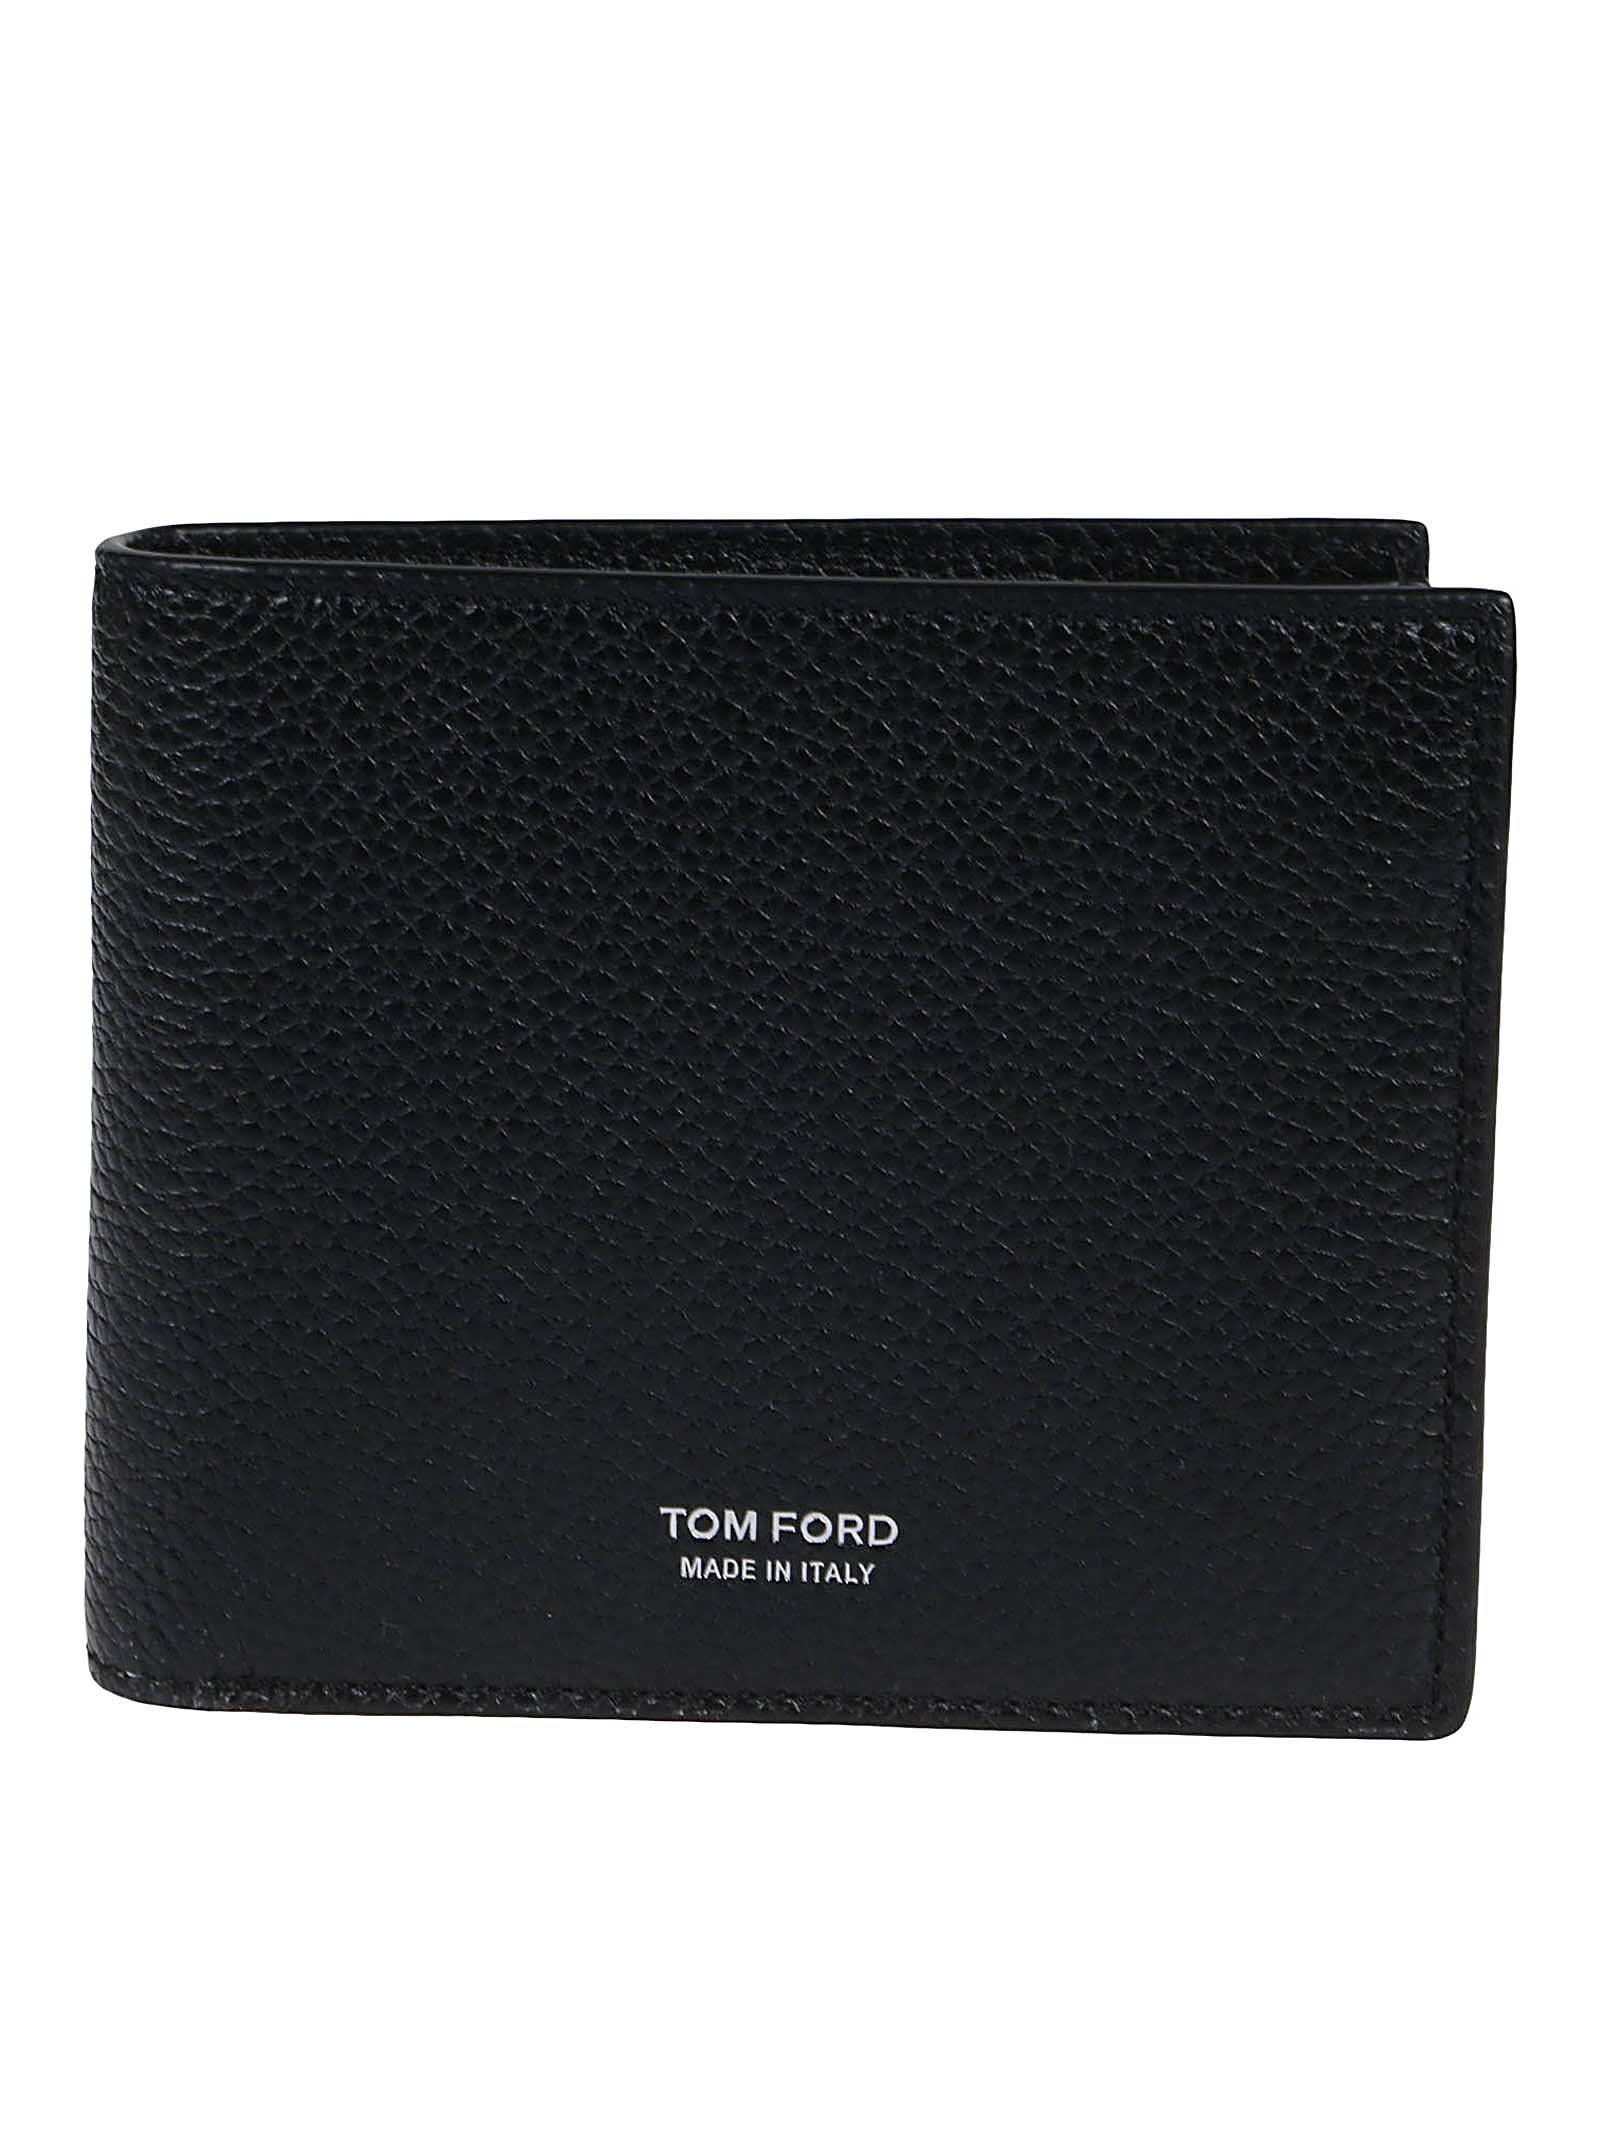 TOM FORD CLASSIC BIFOLD WALLET